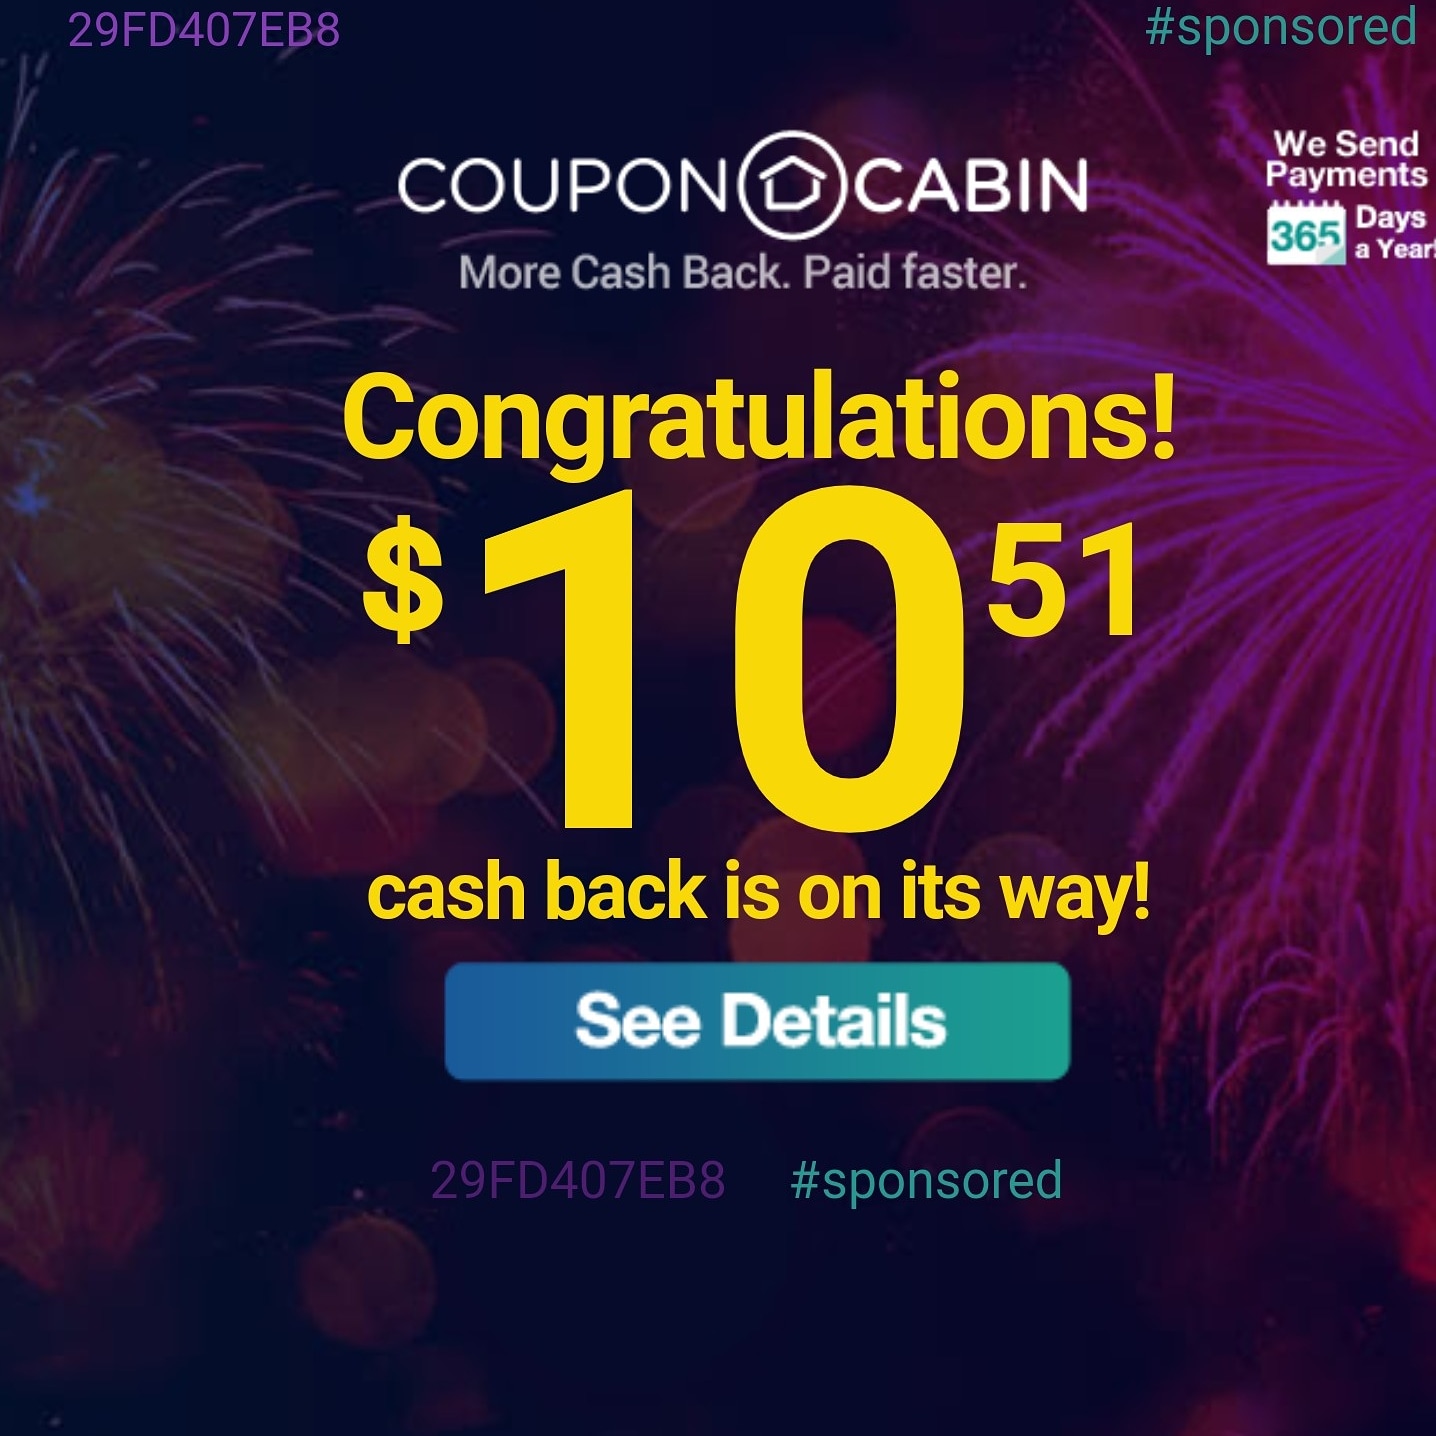 does it cost money to be a member of couponcabin